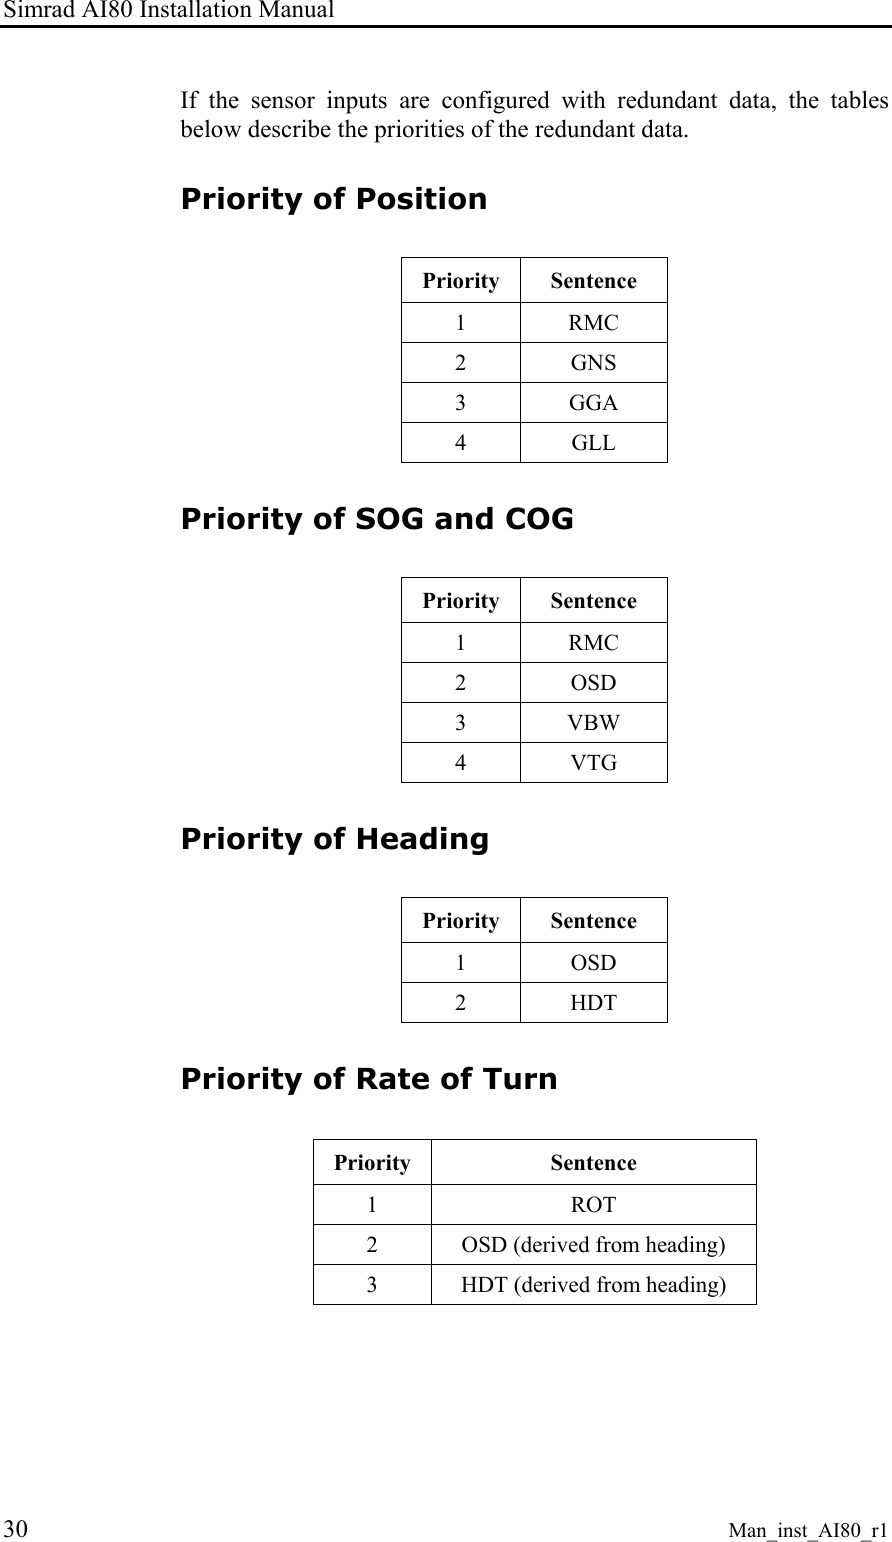 Simrad AI80 Installation Manual 30 Man_inst_AI80_r1 If the sensor inputs are configured with redundant data, the tables below describe the priorities of the redundant data. Priority of Position  Priority  Sentence 1 RMC 2 GNS 3 GGA 4 GLL Priority of SOG and COG  Priority  Sentence 1 RMC 2 OSD 3 VBW 4 VTG Priority of Heading  Priority  Sentence 1 OSD 2 HDT Priority of Rate of Turn  Priority  Sentence 1 ROT 2  OSD (derived from heading) 3  HDT (derived from heading)    